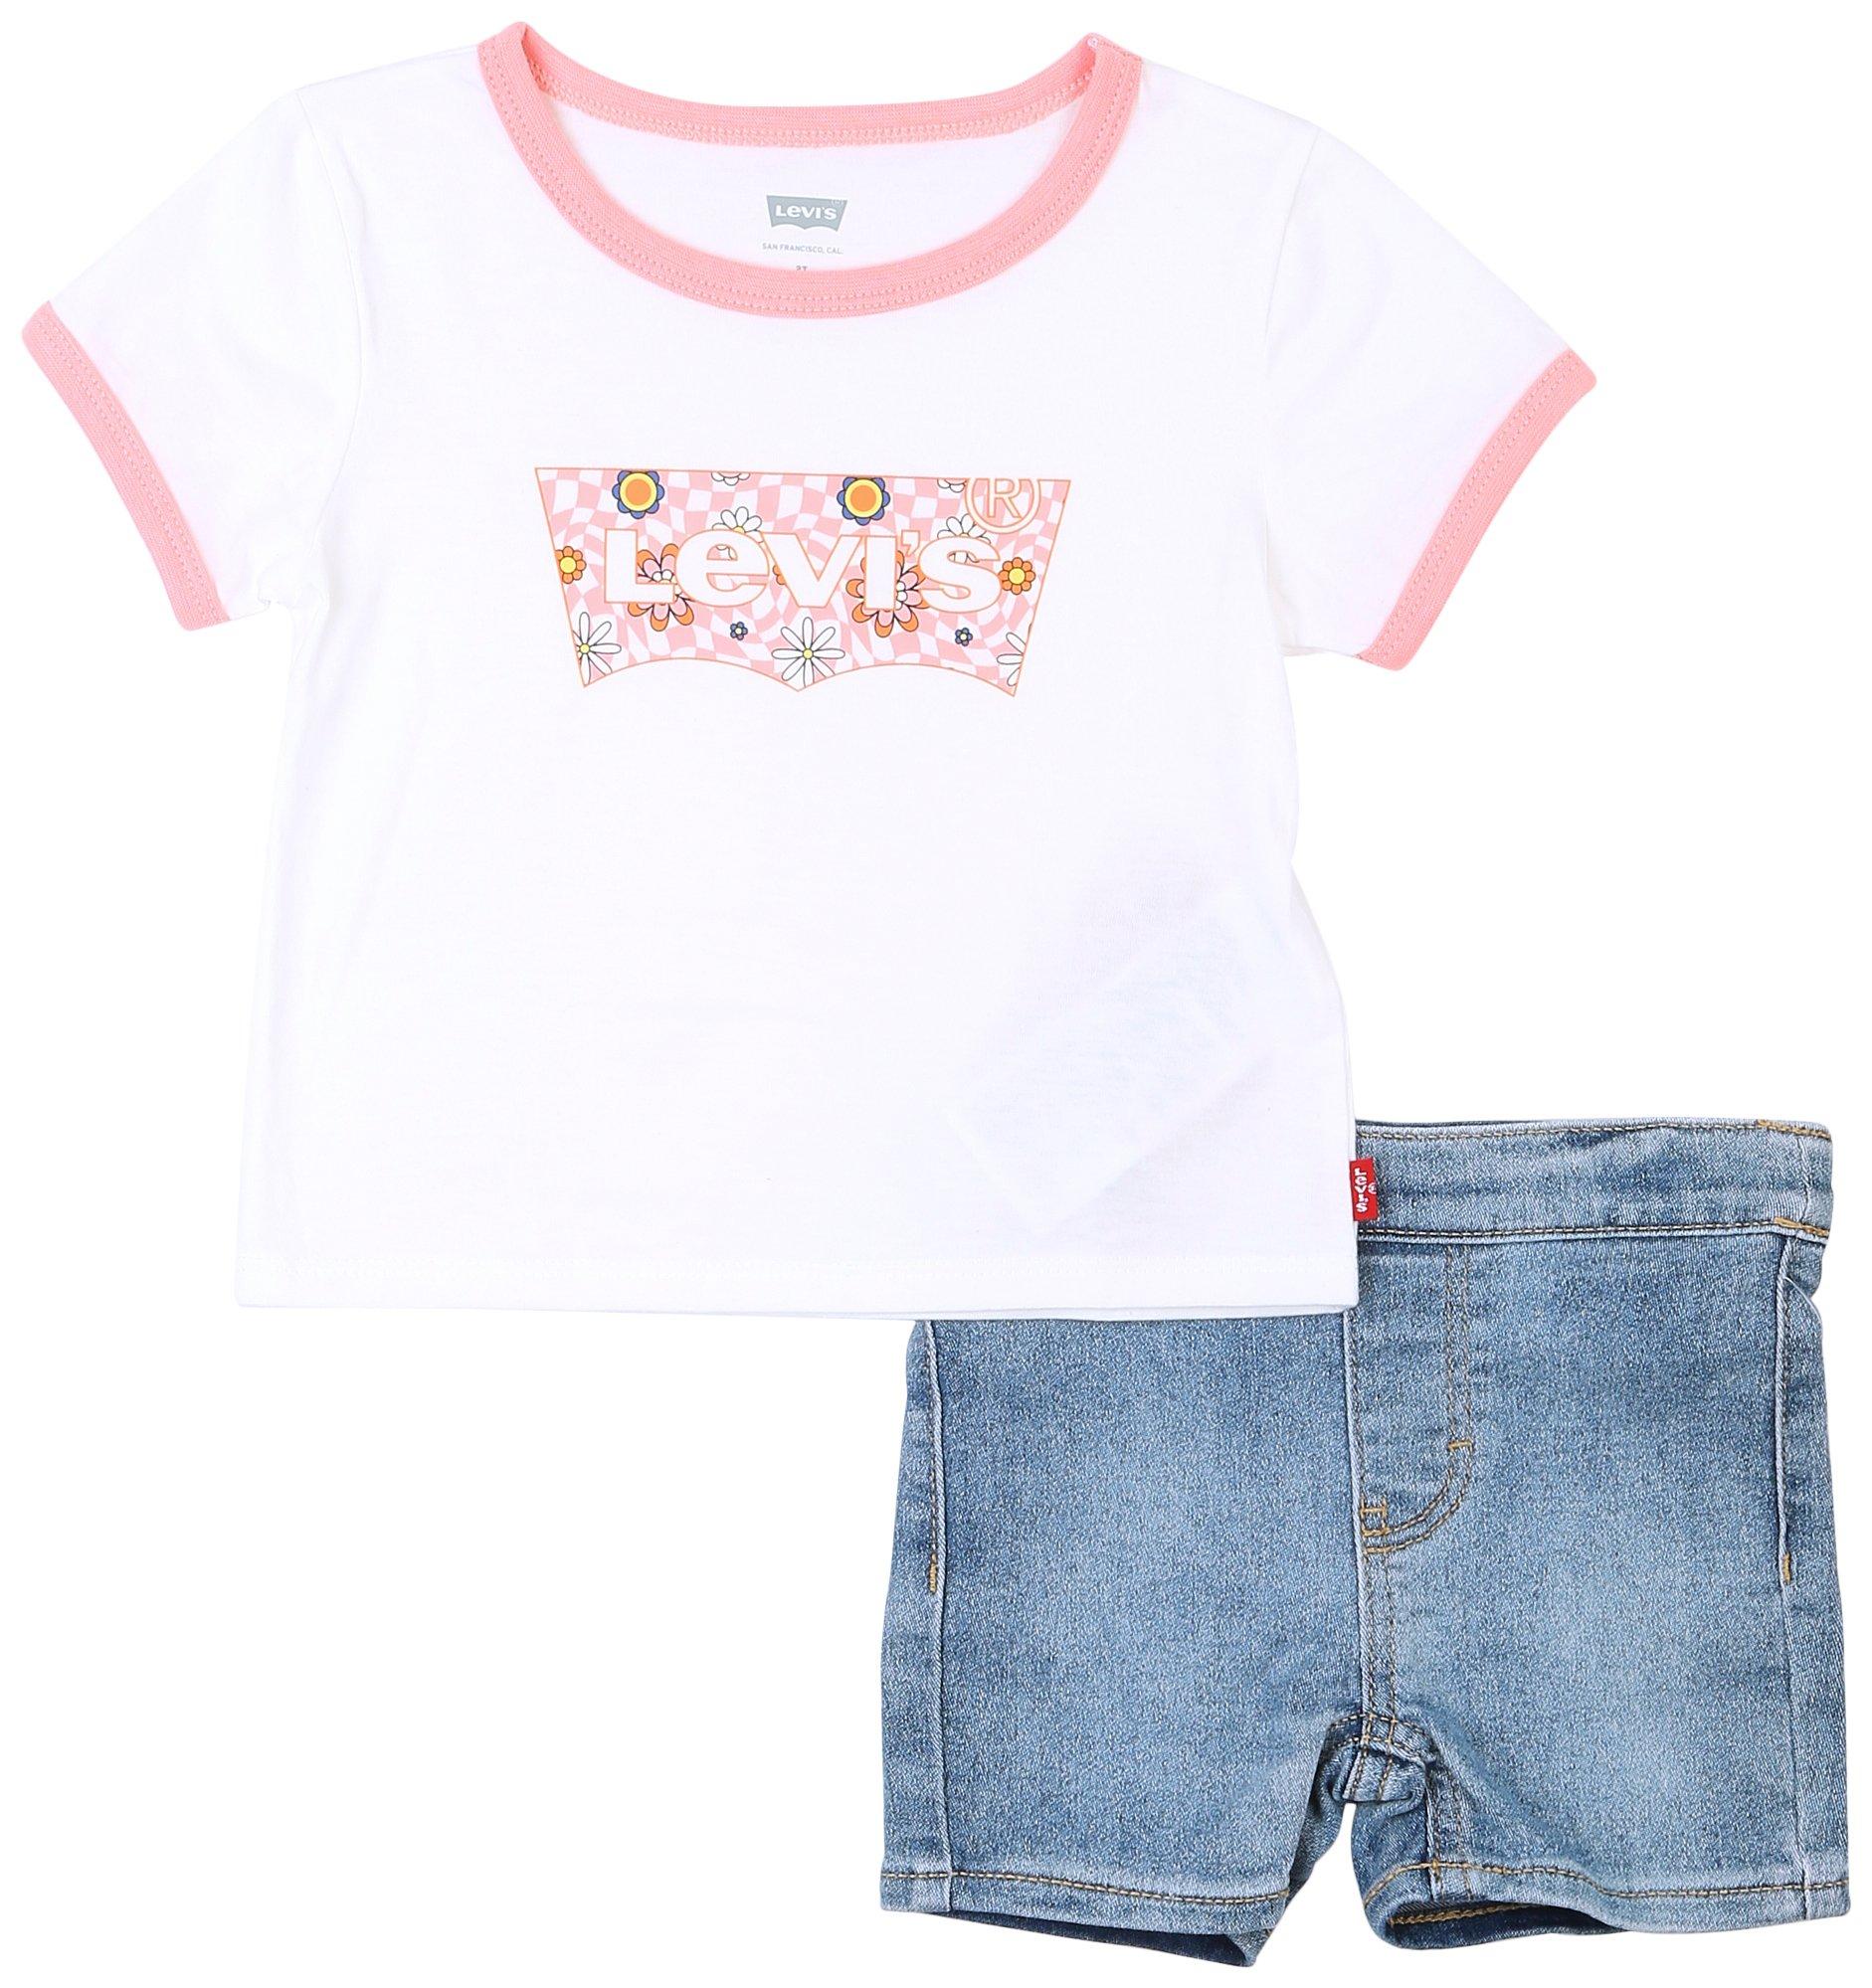 Toddler Girls 2 pc. Checkerboard Top And Short Set